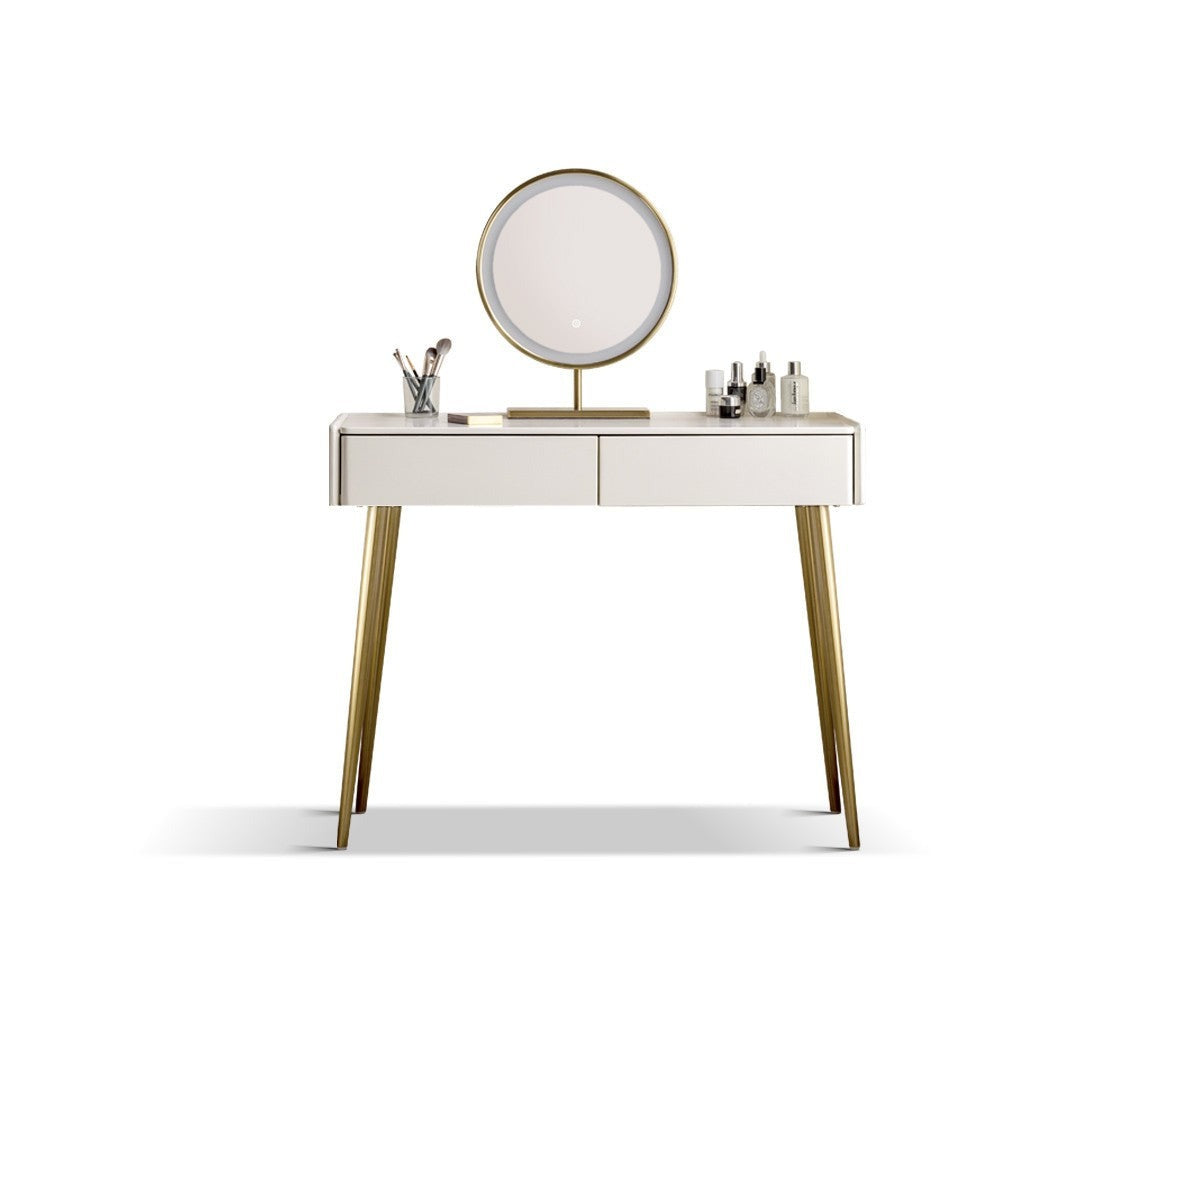 Poplar solid wood dressing table and cupboard integrated cream style"